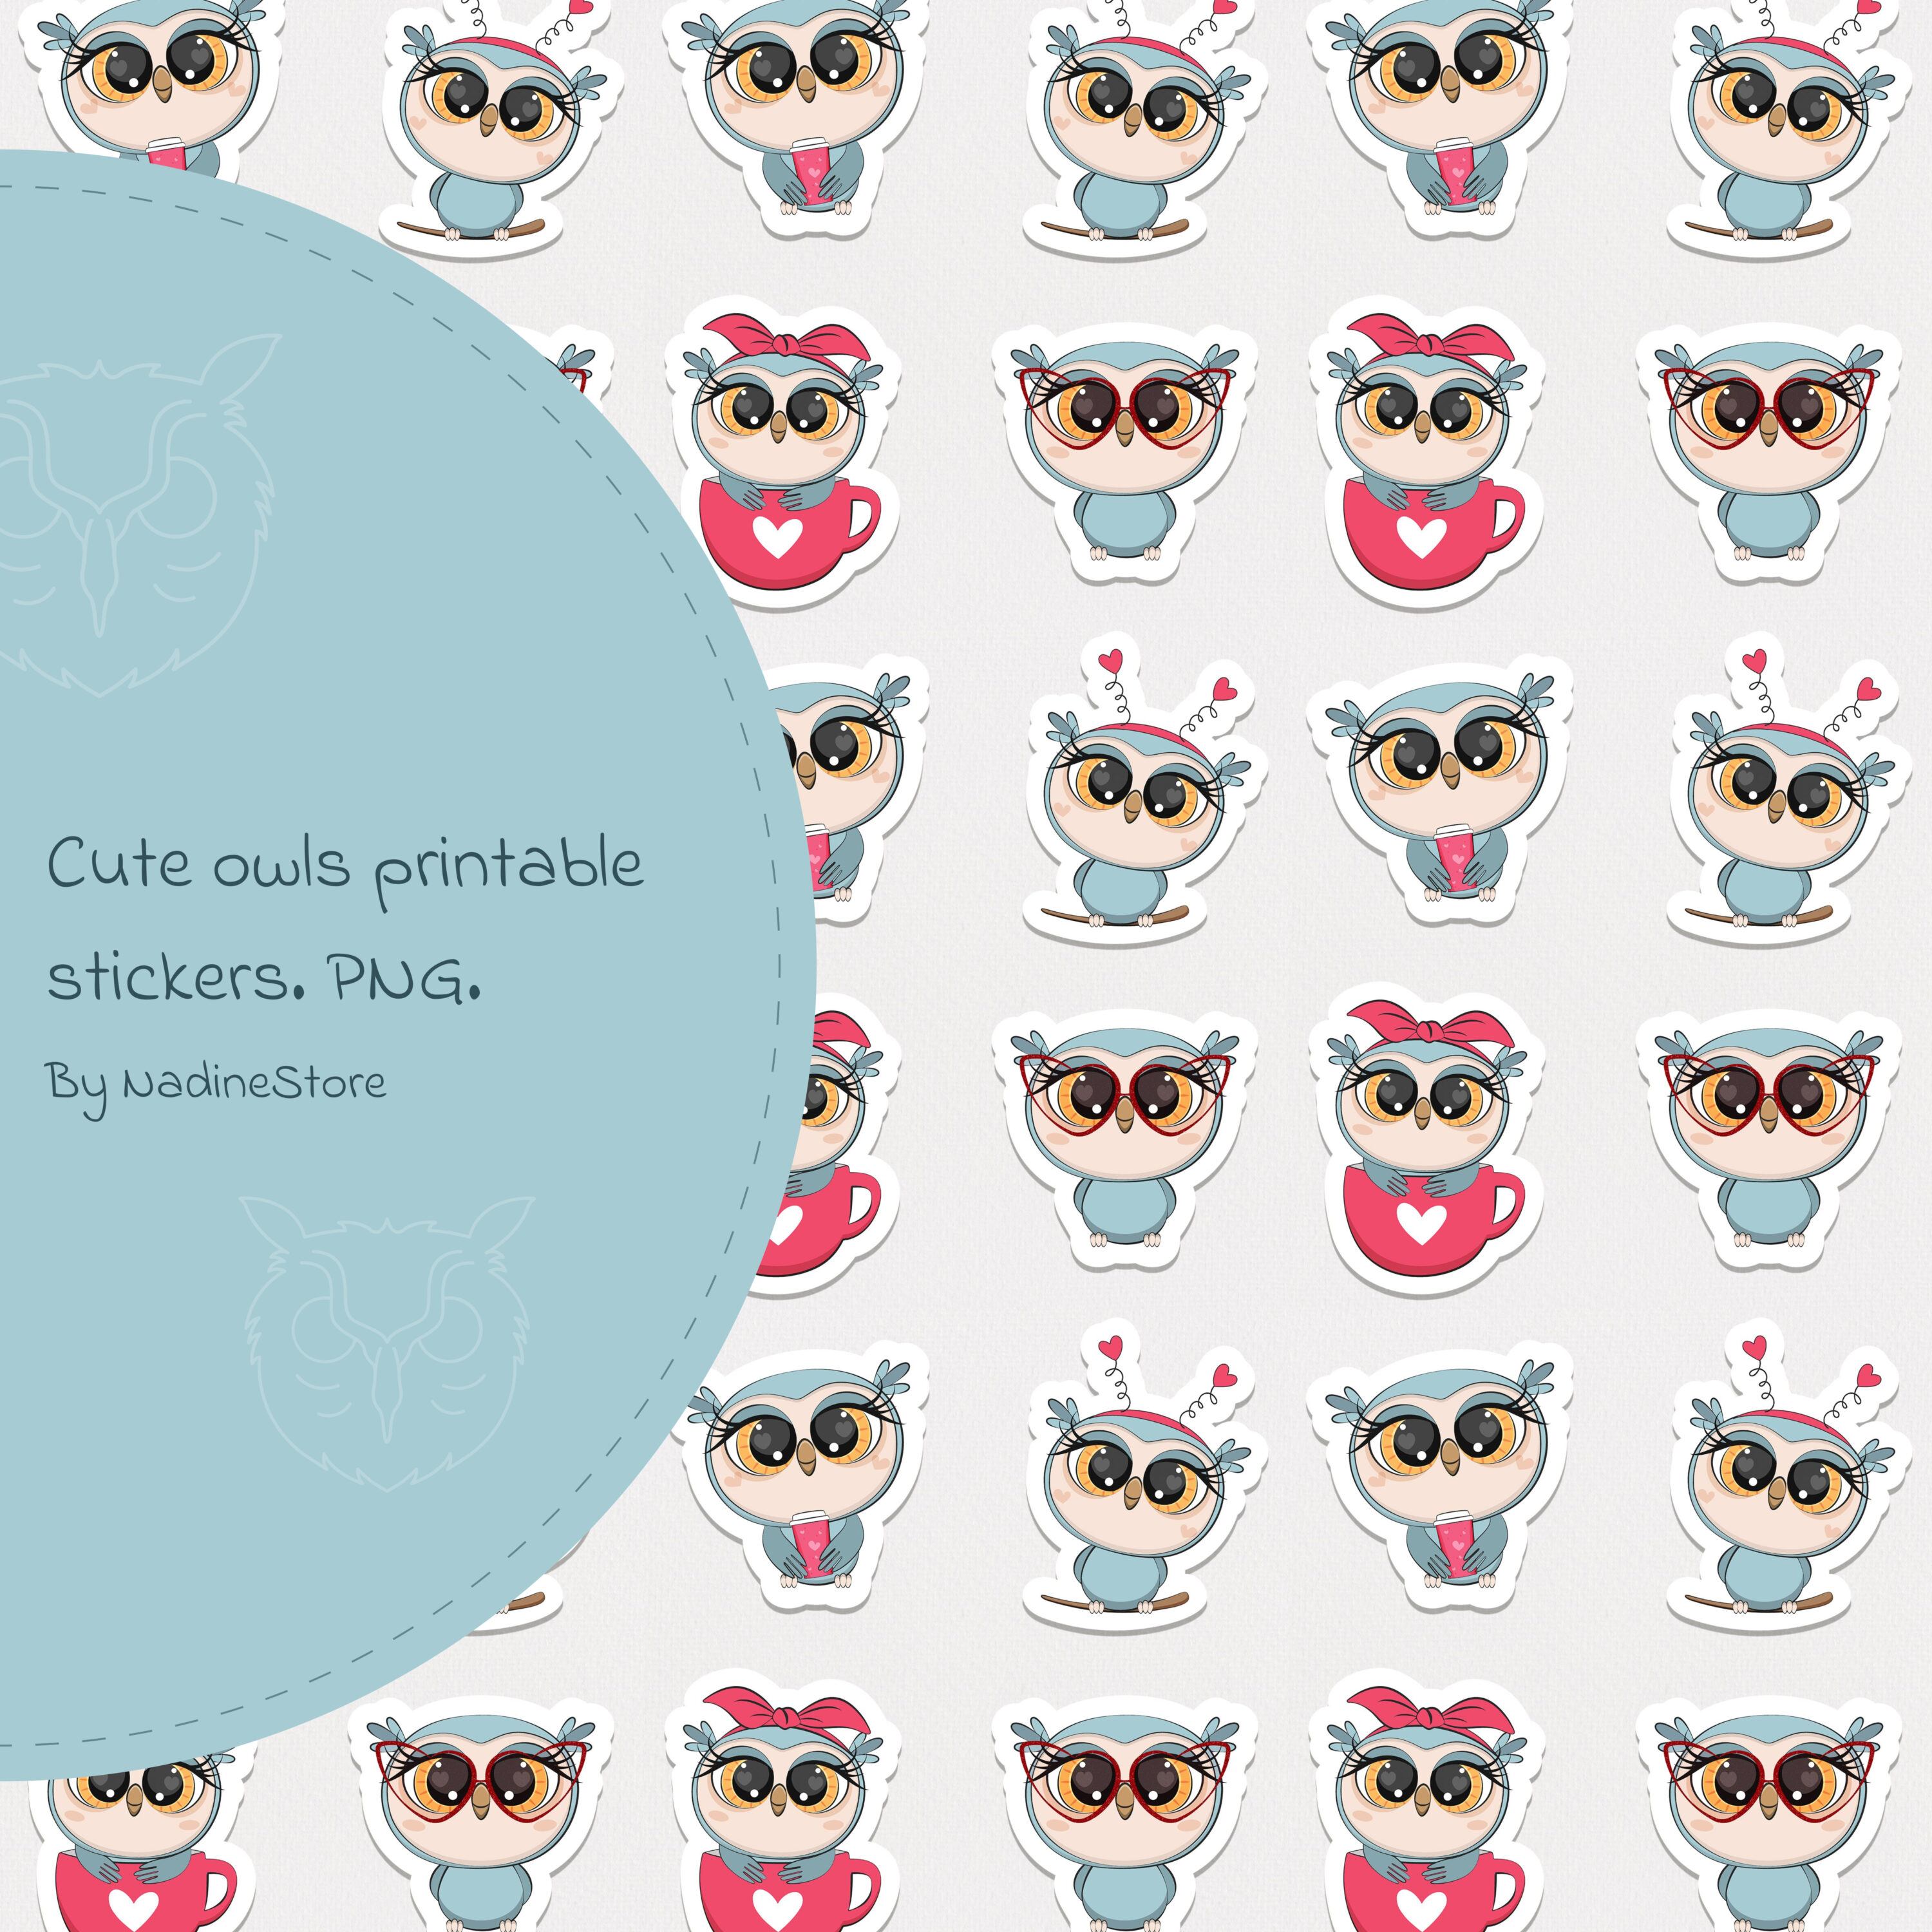 Prints of cute owls printable stickers.